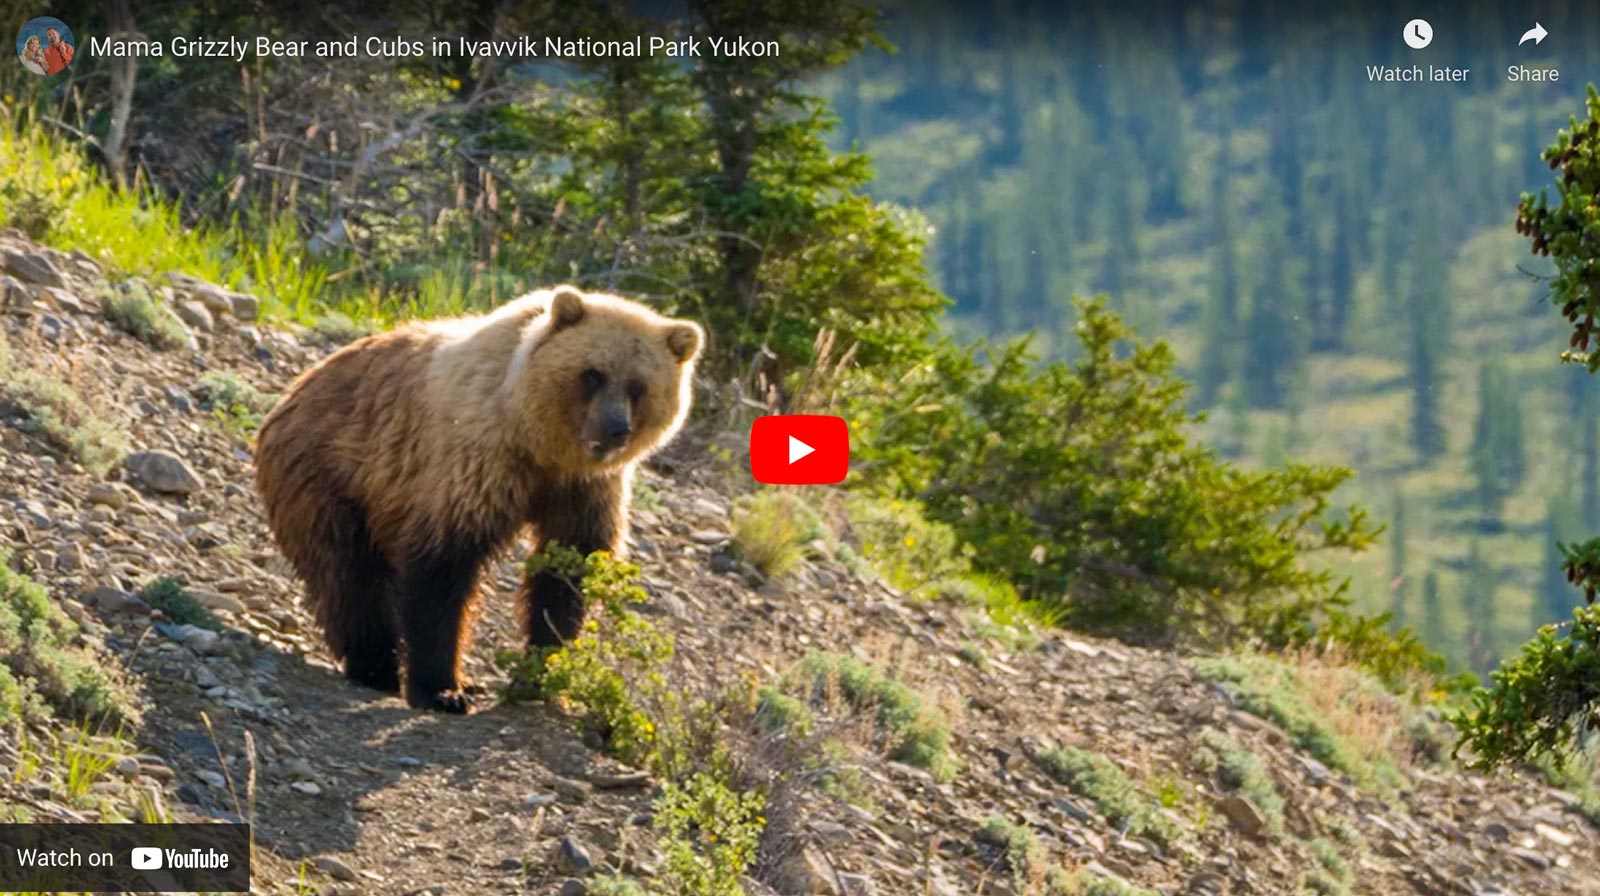 ivvavik national park grizzly bear encounter video